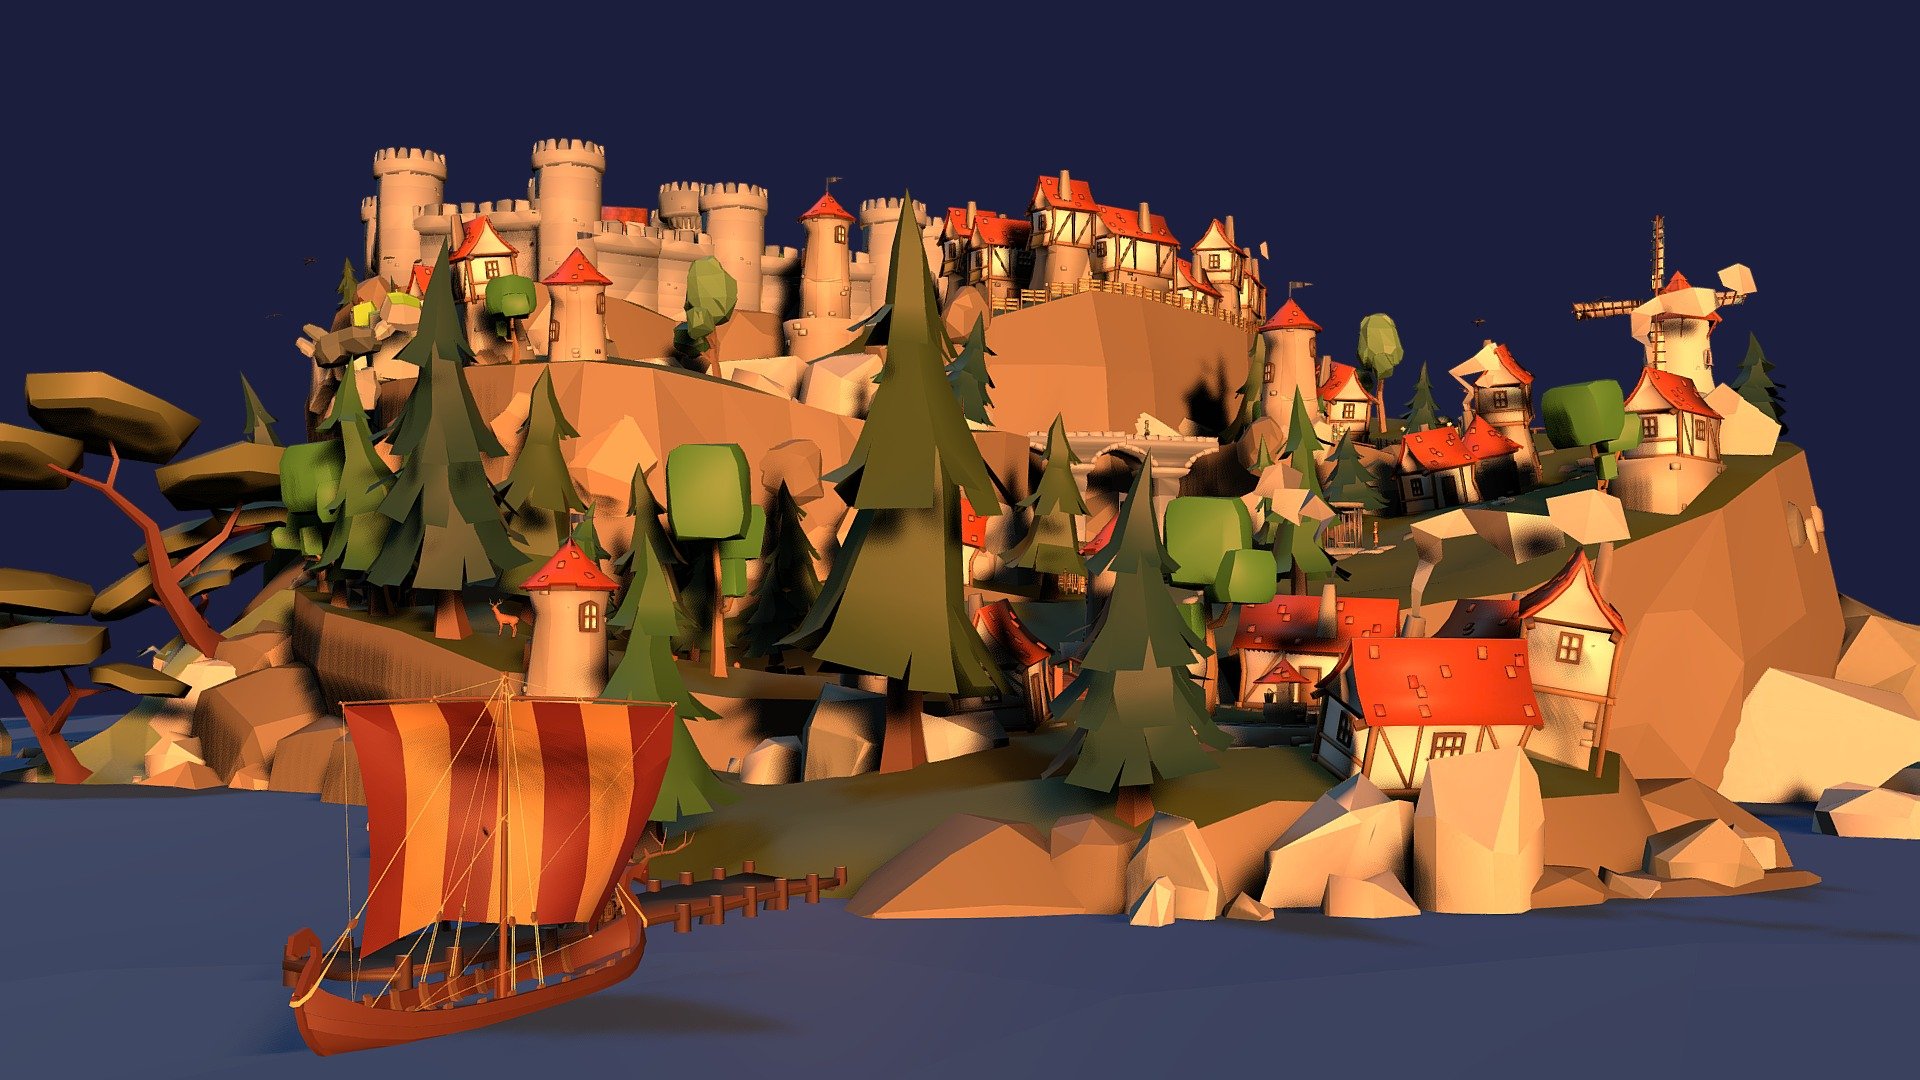 Thanks to the following Artists
Vladislav Laryushin https://sketchfab.com/Zorg741 Wooden Fence and shelter, wooden crates and barrels,  Stone, Cluster Stone , Houses 1-4,  Towers 1-3, waterfall land piece.
roguenoodle https://sketchfab.com/roguenoodle Main Island &amp; Secondary Island, Trees, Stone
MrEmjeR https://sketchfab.com/MatthijsDeRijk all Vikings, their weapons, ships, some trees and rocks.
Tuturu https://sketchfab.com/tuturu Thrones, Cup and towns Folk.
Alok https://sketchfab.com/alok.aks50 Firewood, Bucket, Creates barrel.
artBake 3D https://sketchfab.com/ismir Sheep.
Inuciian https://sketchfab.com/Inuciian  Well.
Rusya https://sketchfab.com/Rusya.Rusya  Tree
Hansto https://sketchfab.com/Hanesto  Market Stalls.
Pixel https://sketchfab.com/stefan.lengyel1  Castle Parts, Shelters, Windmill, bridges, Sheep, Deer, Cows,
3D Pipeline Studios https://sketchfab.com/RHALL Golem
mageaster https://sketchfab.com/mageaster Fireplace
VitSh https://sketchfab.com/VitSh Bear, wizard, goat - Issum, The town on Capital Isle - Download Free 3D model by Olee 3d model